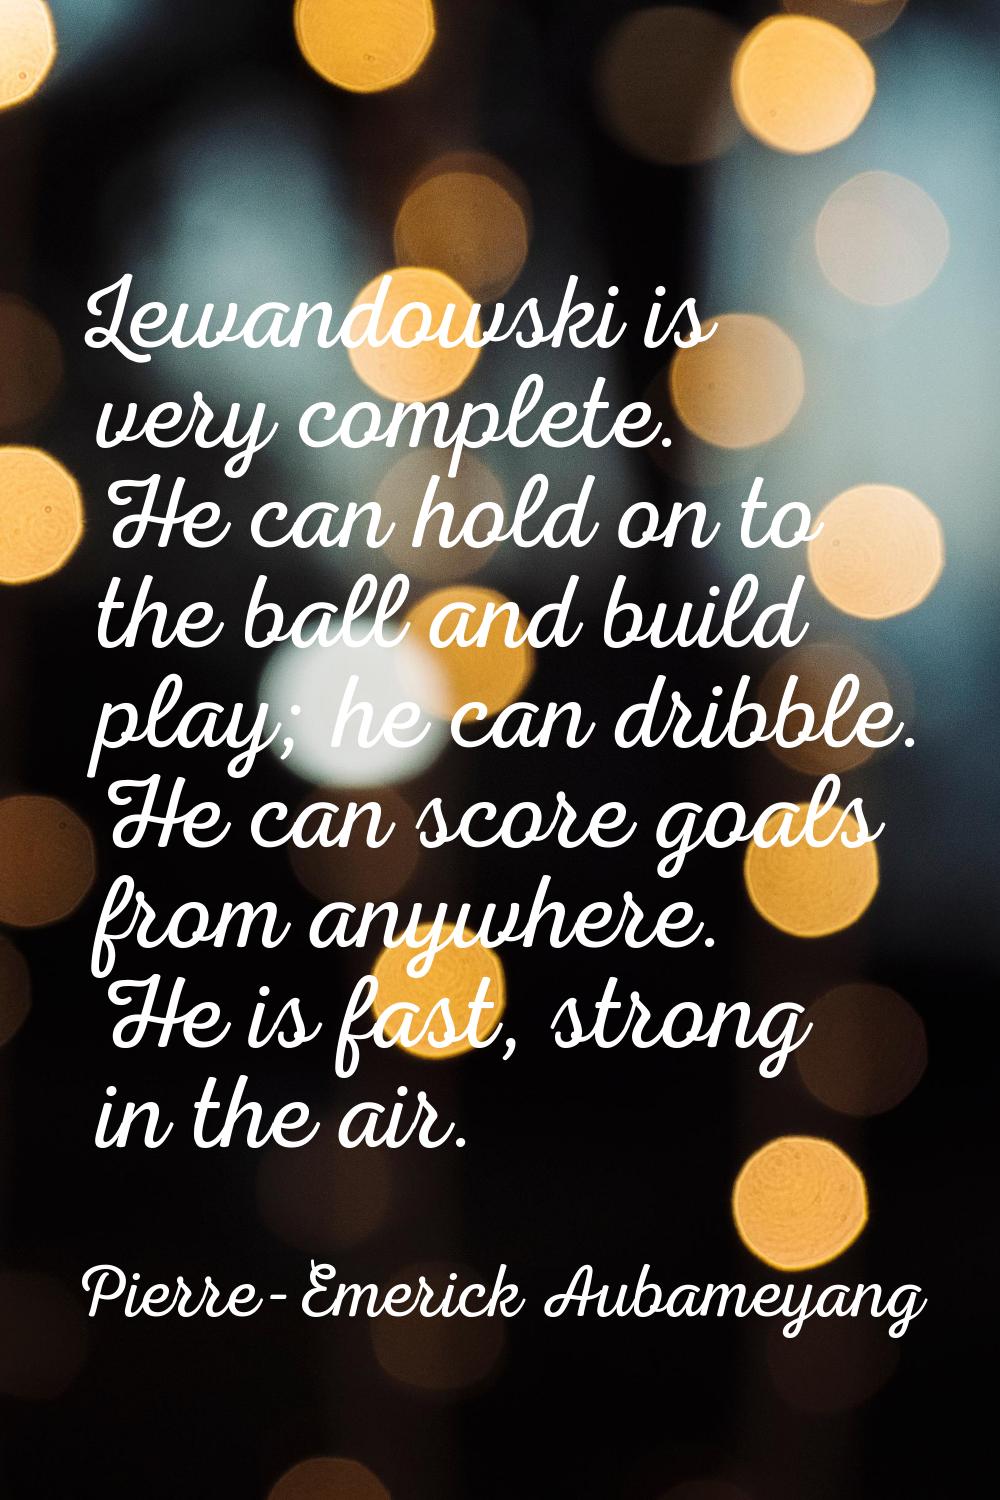 Lewandowski is very complete. He can hold on to the ball and build play; he can dribble. He can sco